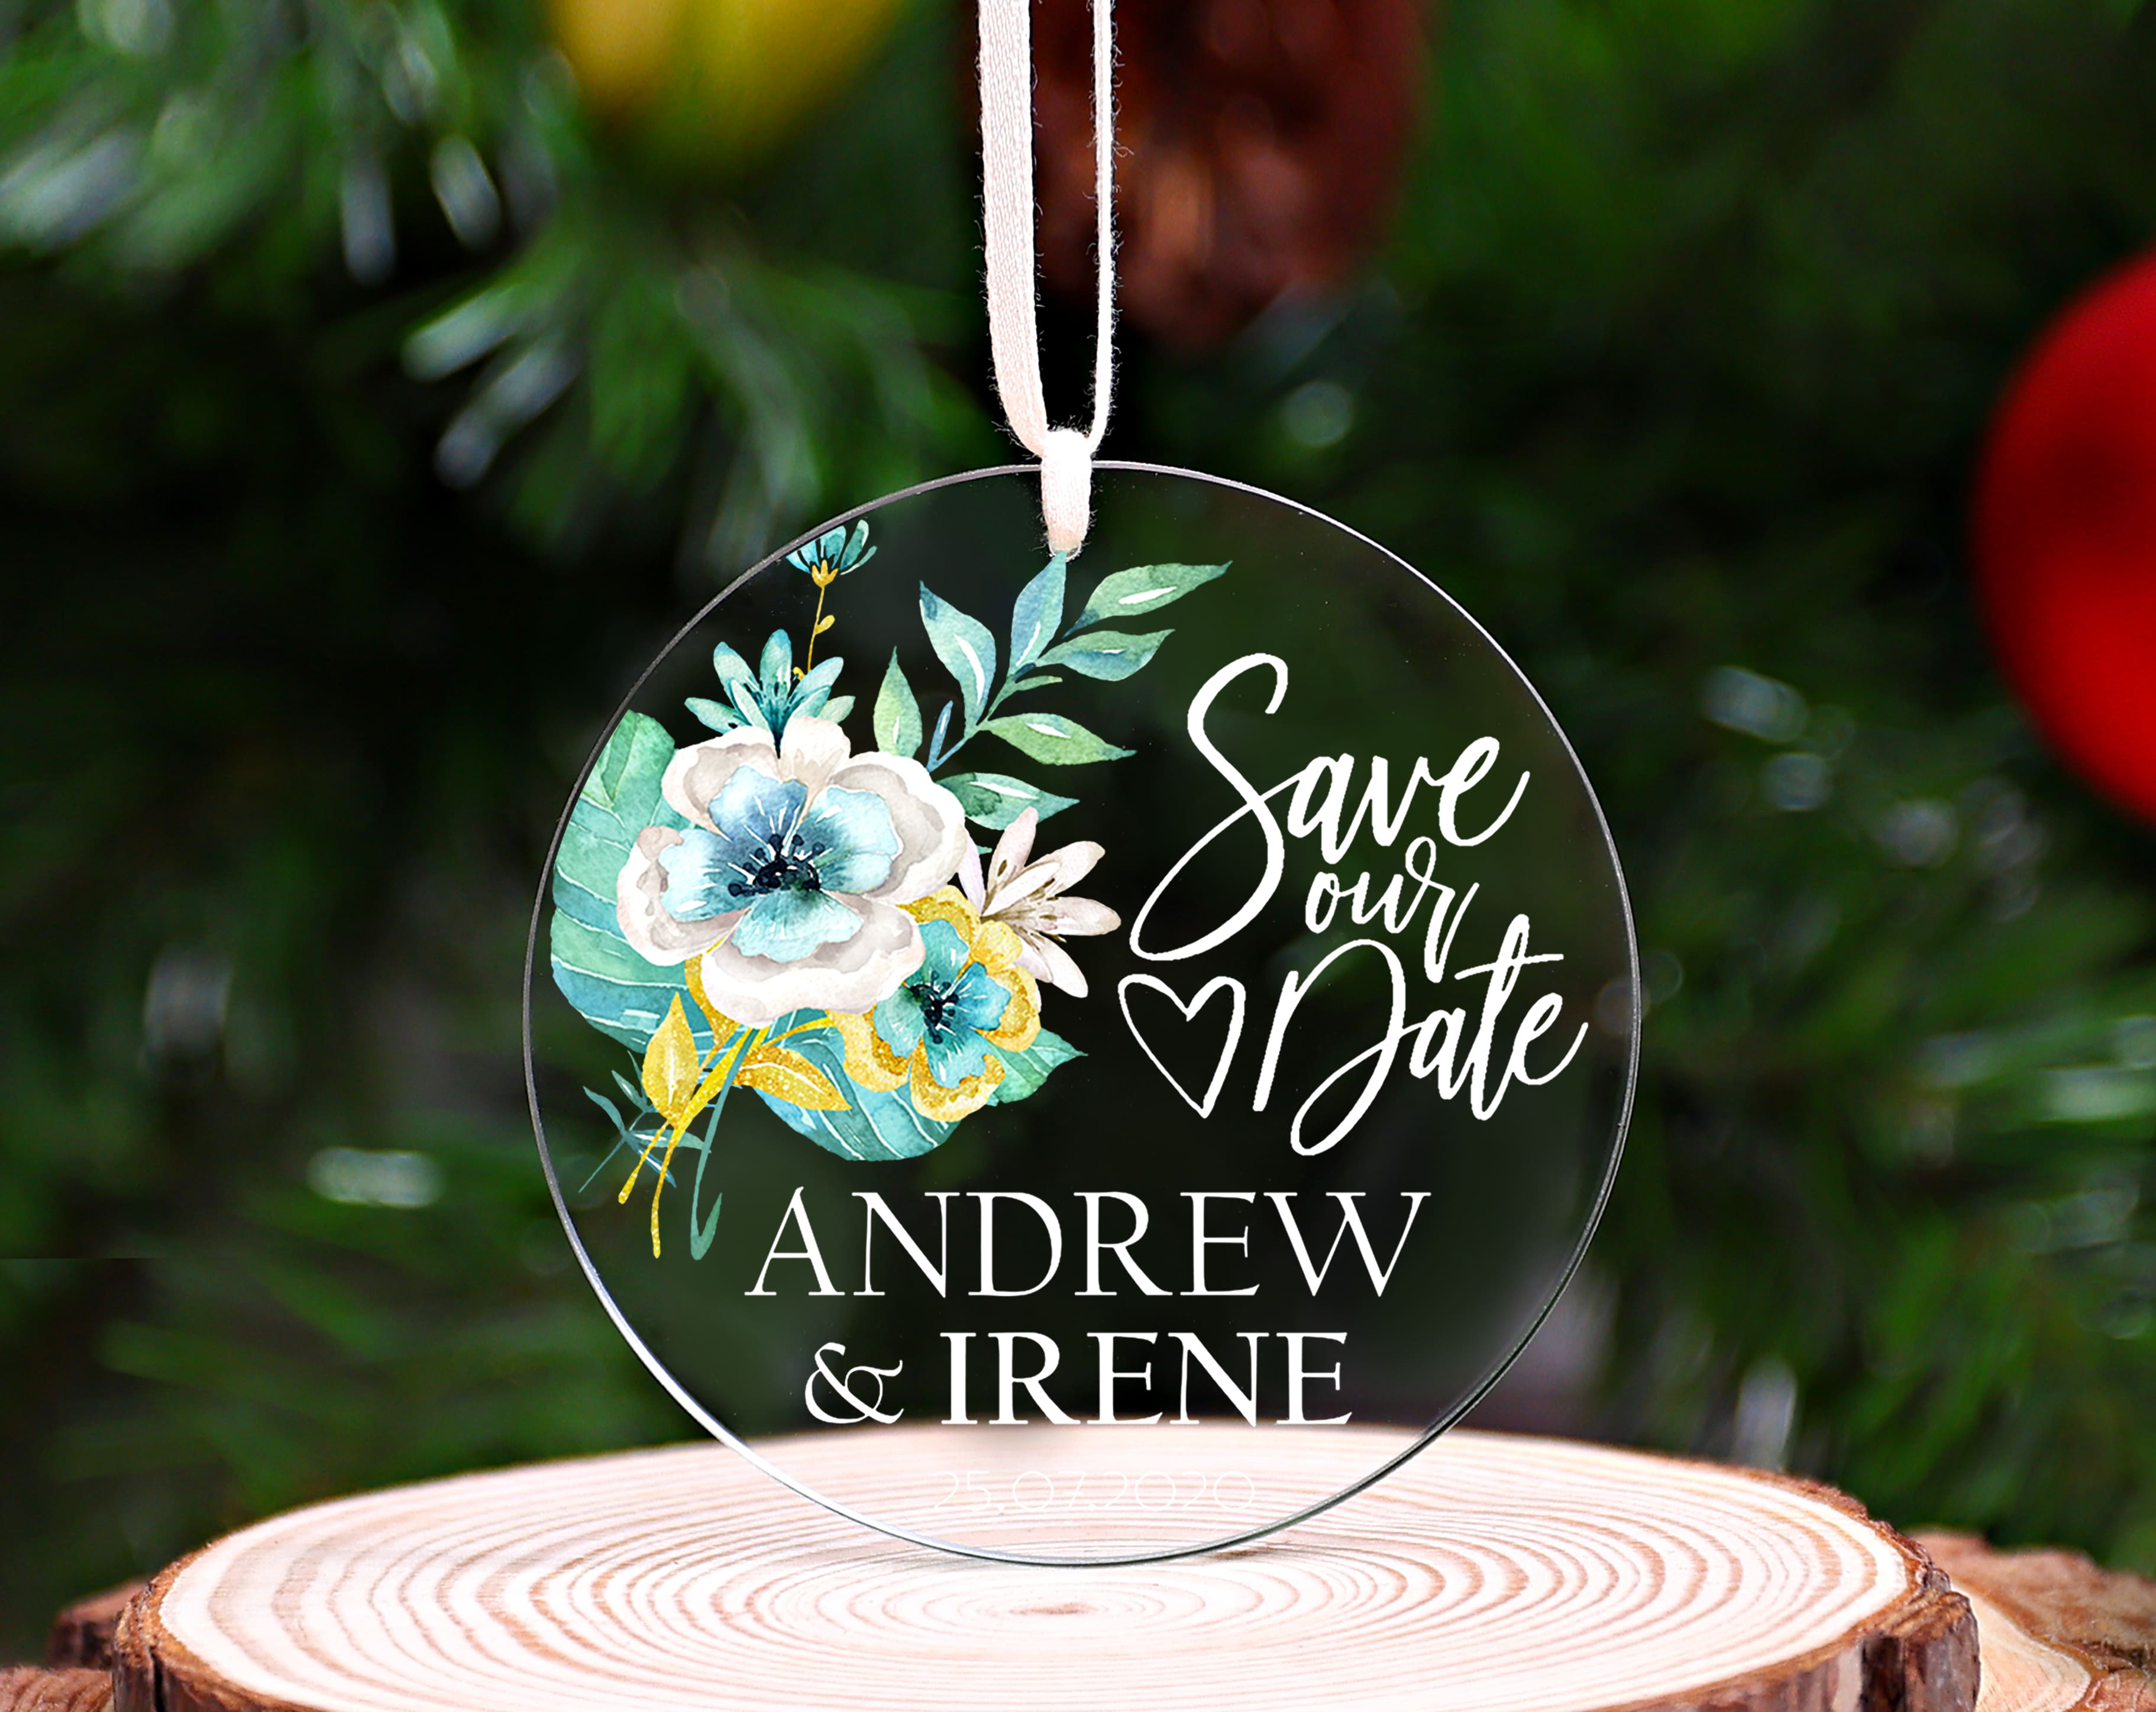 Personalized GLASS Wedding Ornament, Engraved Floral Ornament, Newlywed Gift, Engraved Couple Gift, Engagement Keepsake, Gift For Bride (Copy)